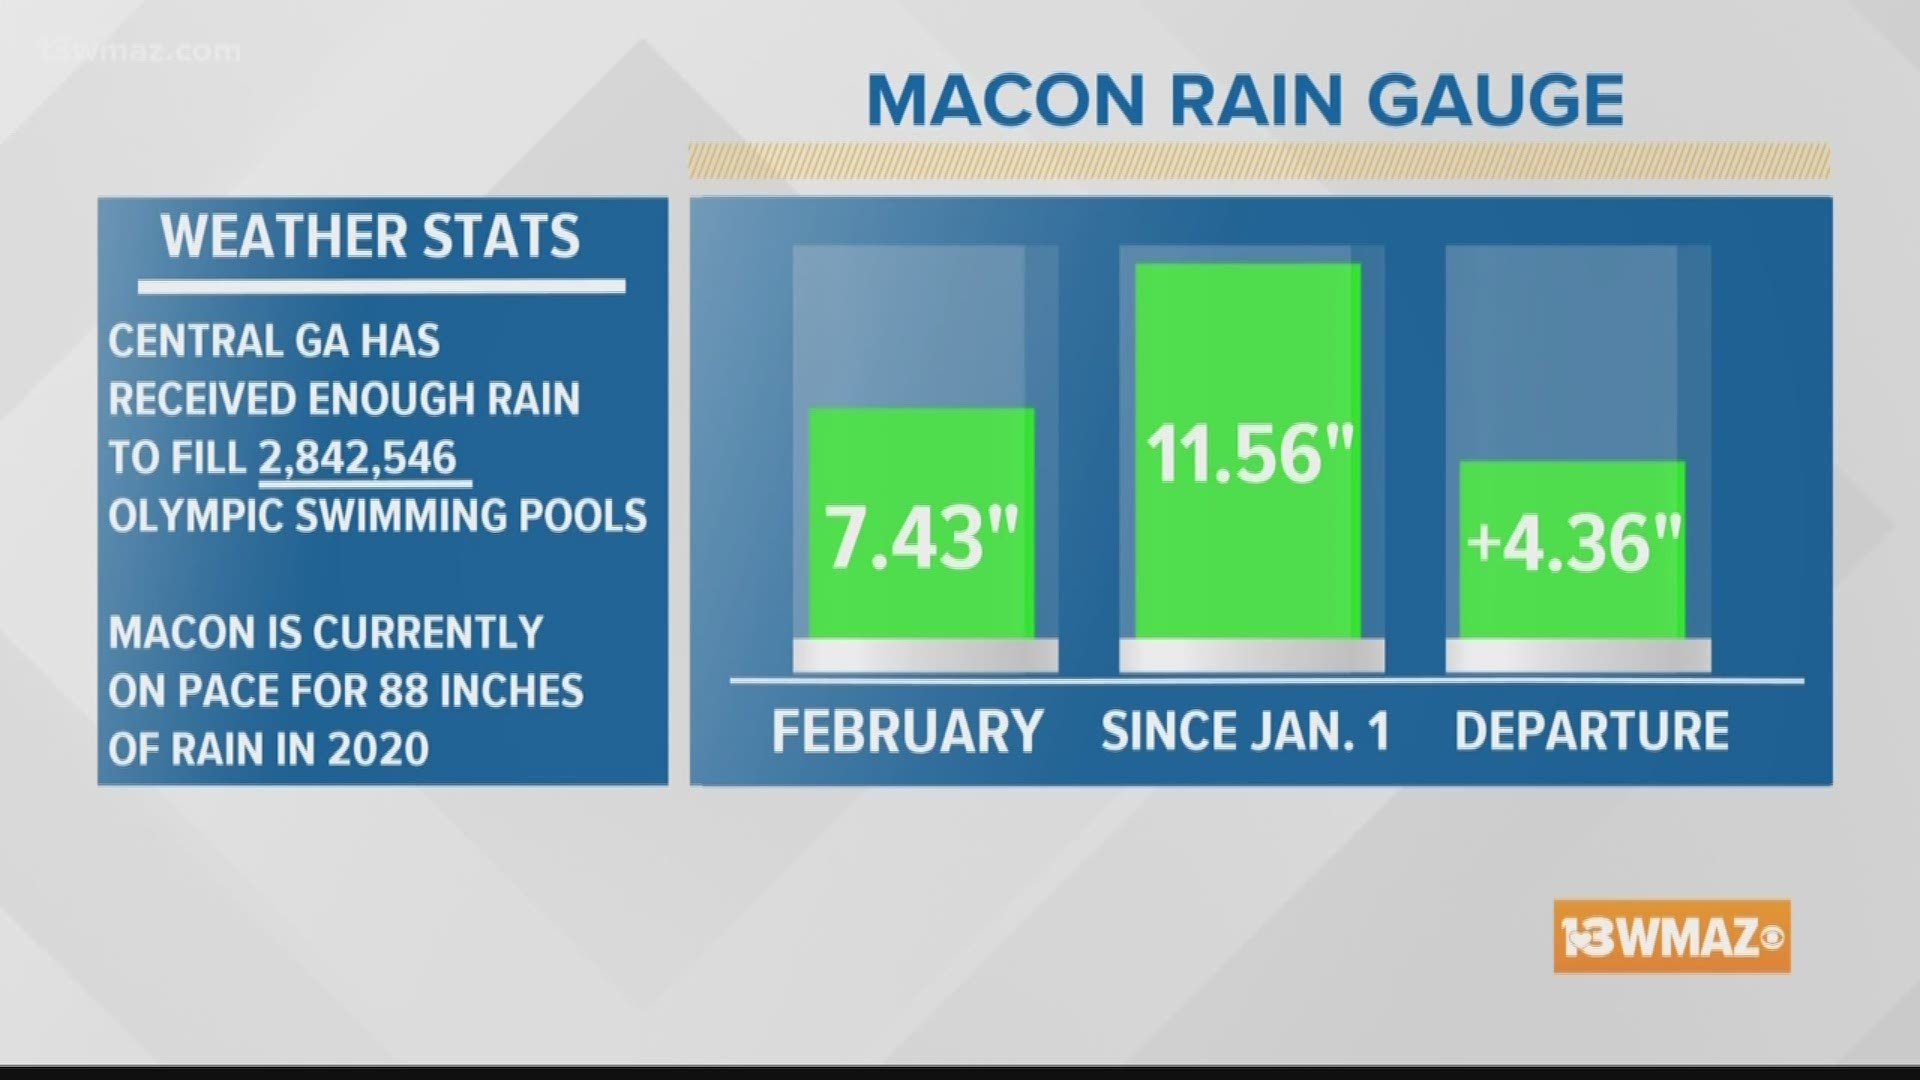 It's raining again on this fine Thursday in Macon. That is no surprise, and by now, you have probably wondered just how much rain we've seen recently.